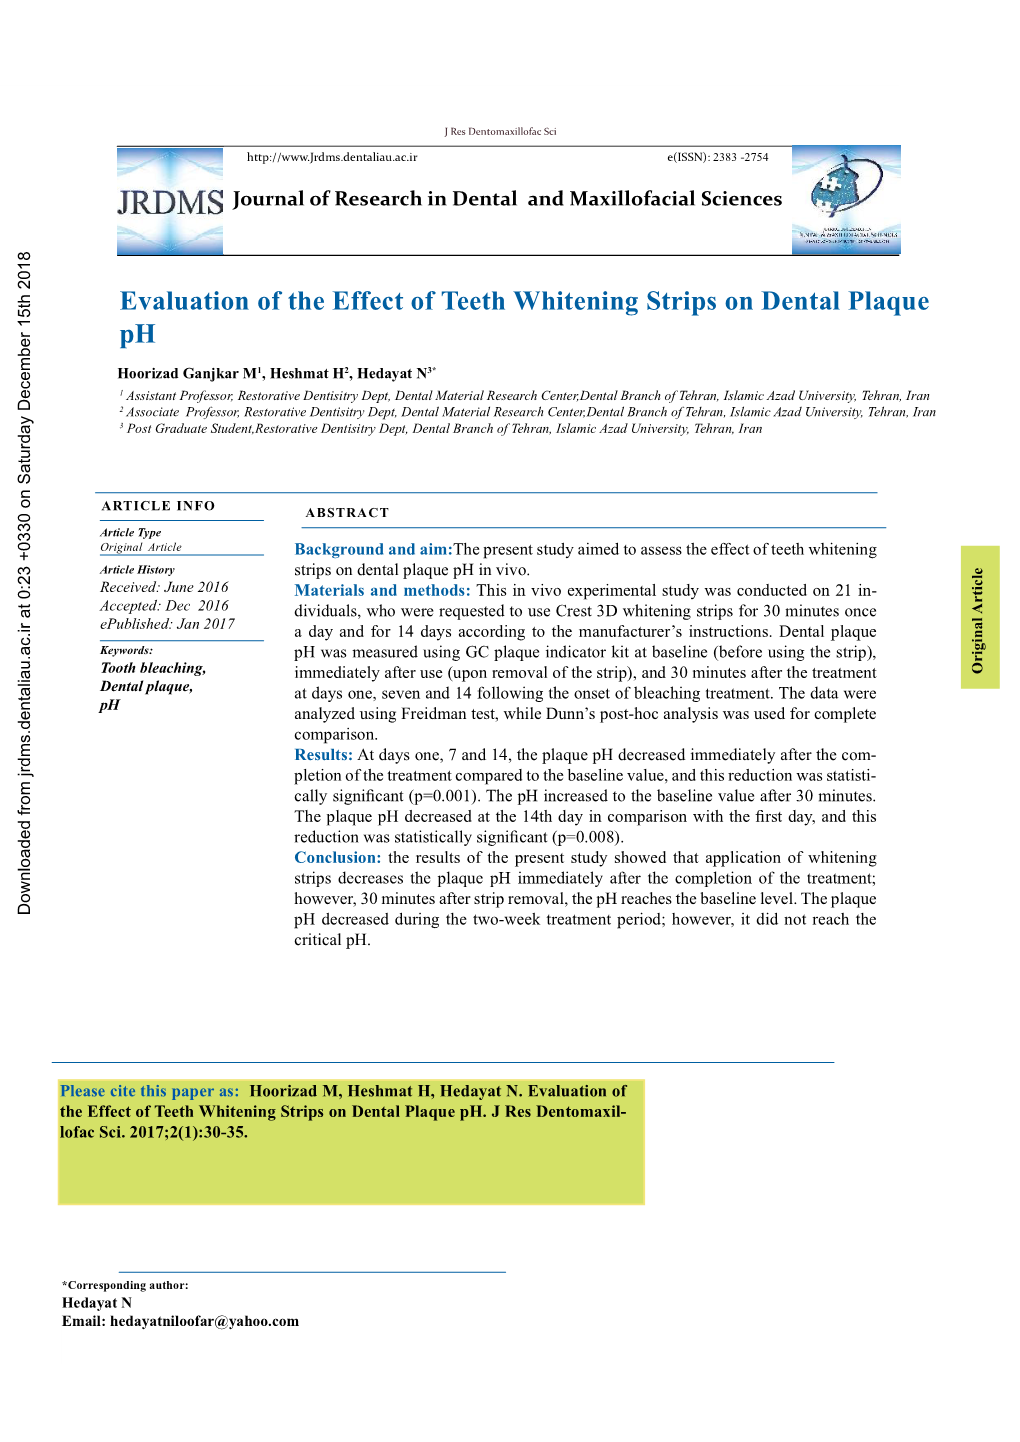 Evaluation of the Effect of Teeth Whitening Strips on Dental Plaque Ph